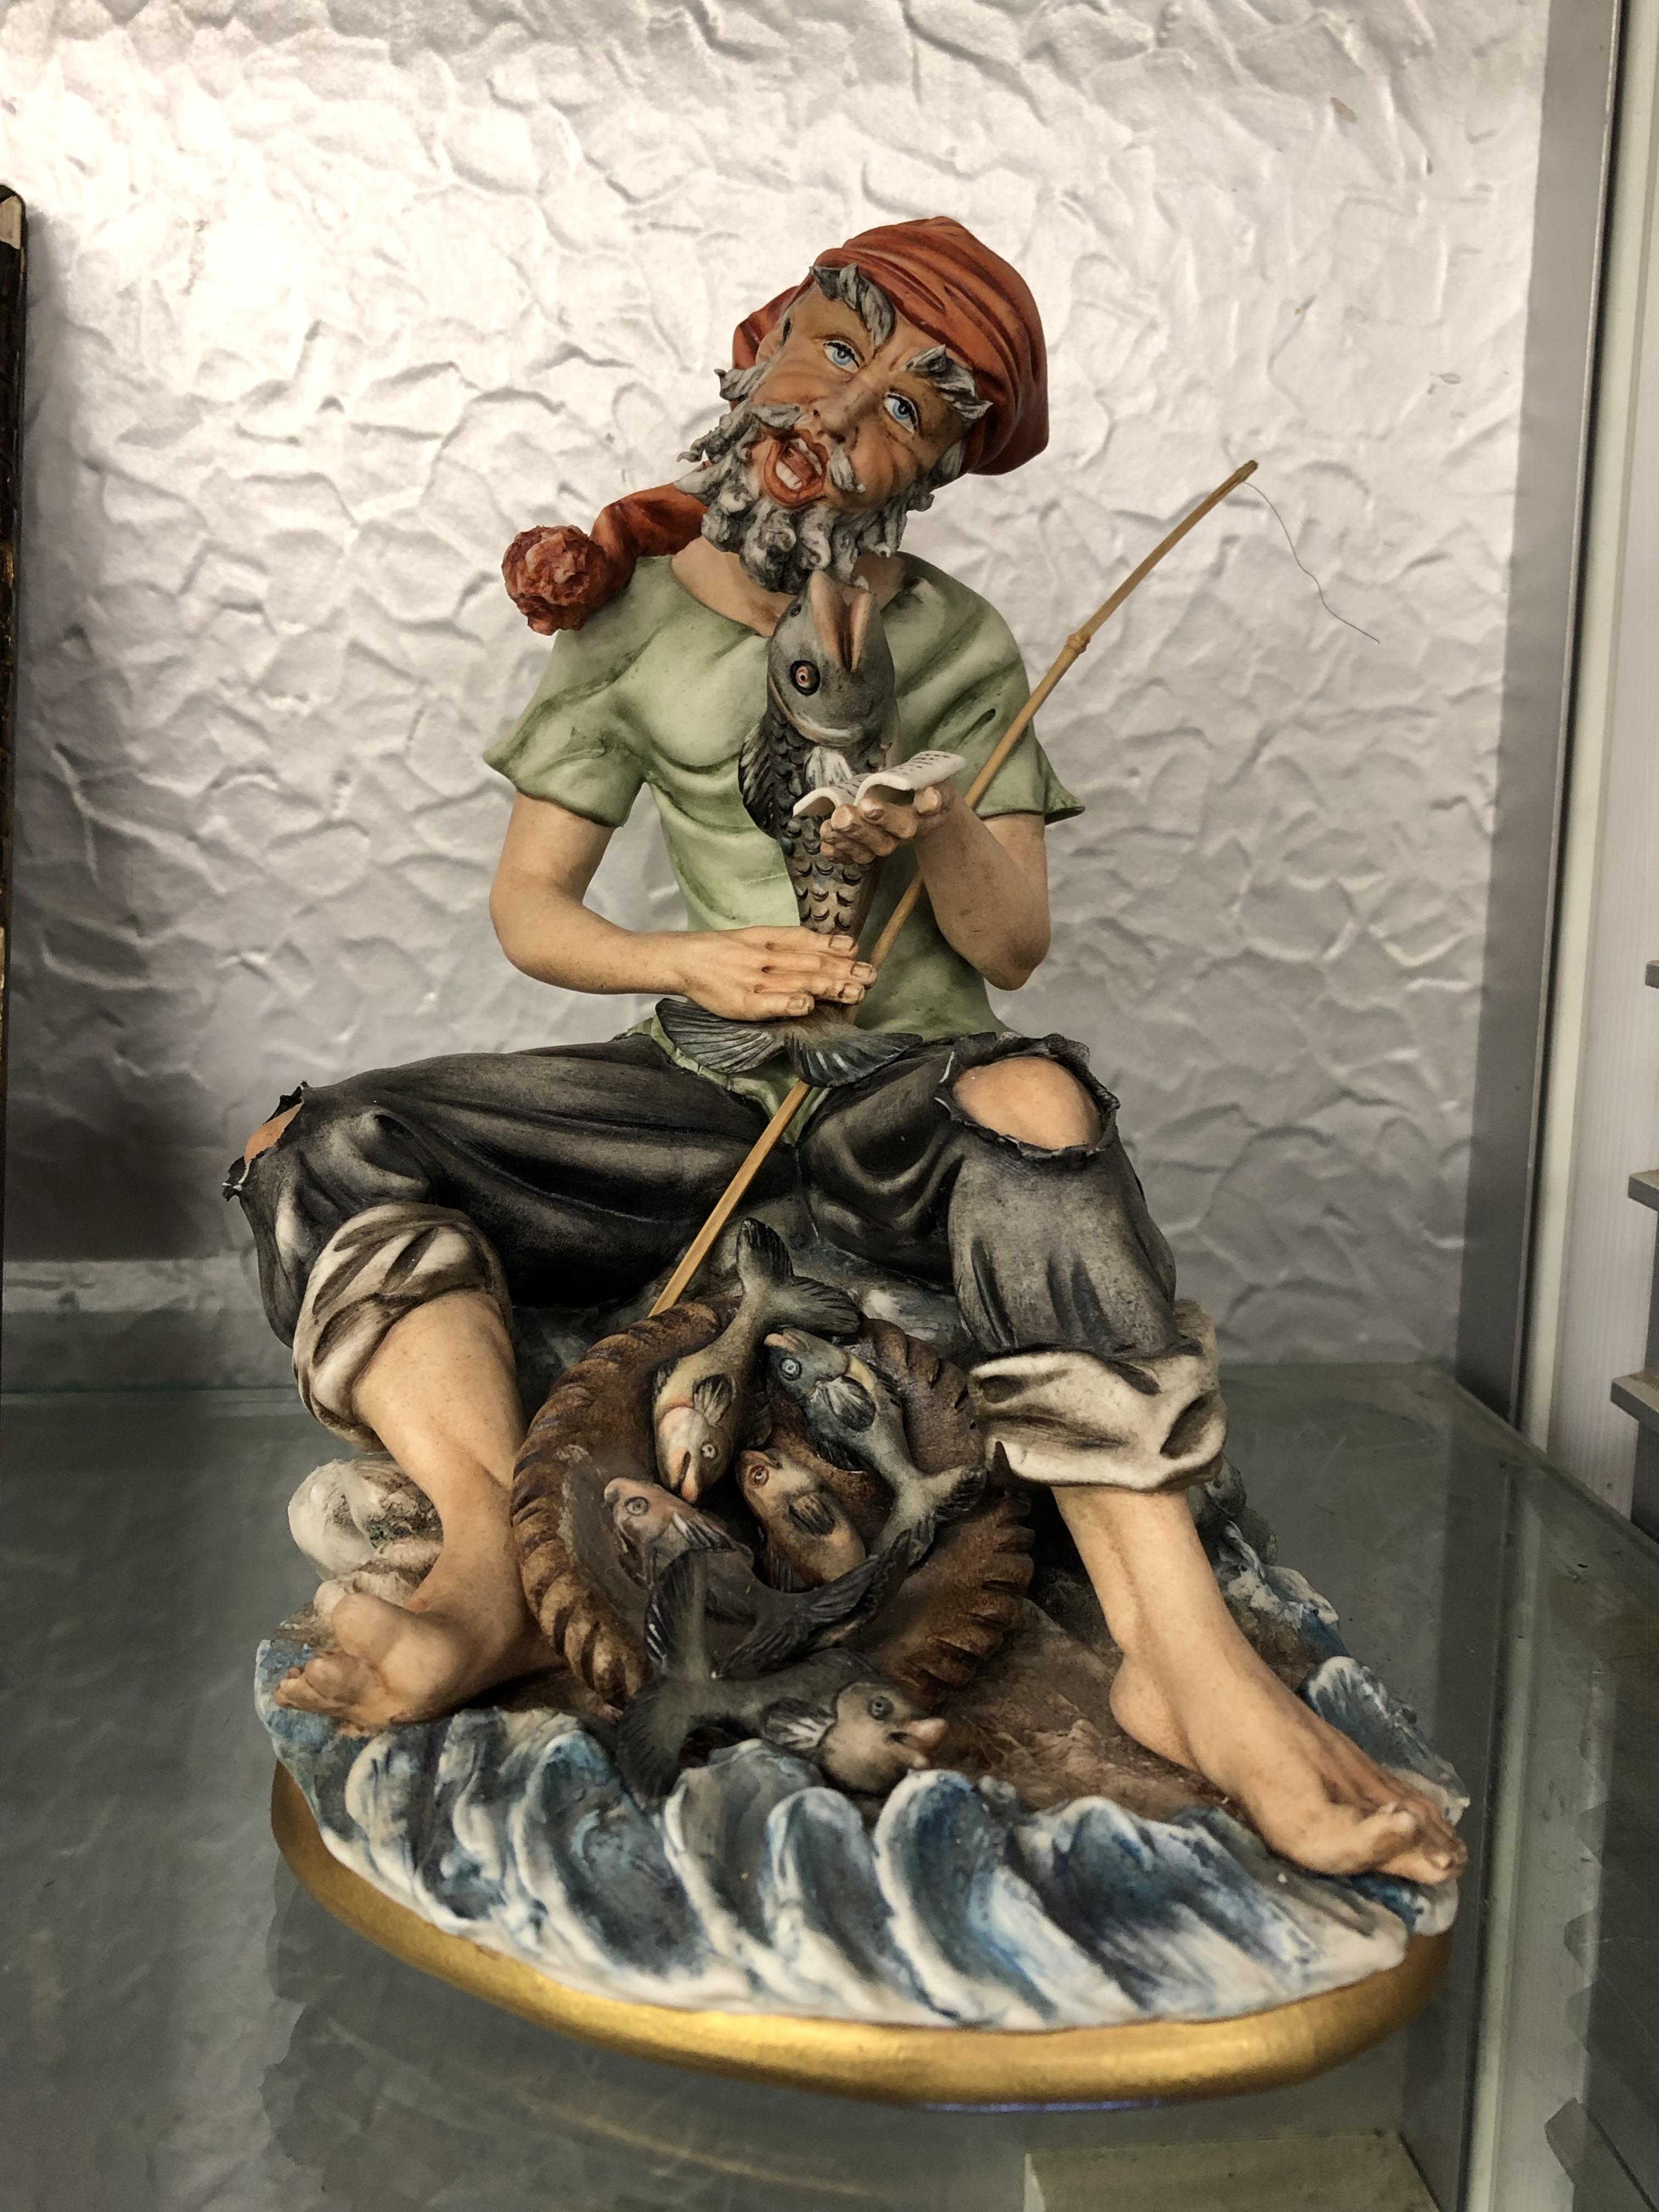 CAPO DI MONTE PORCELAIN FIGURE GROUP OF A SEATED FISHERMAN BY CORTEZ NO 329